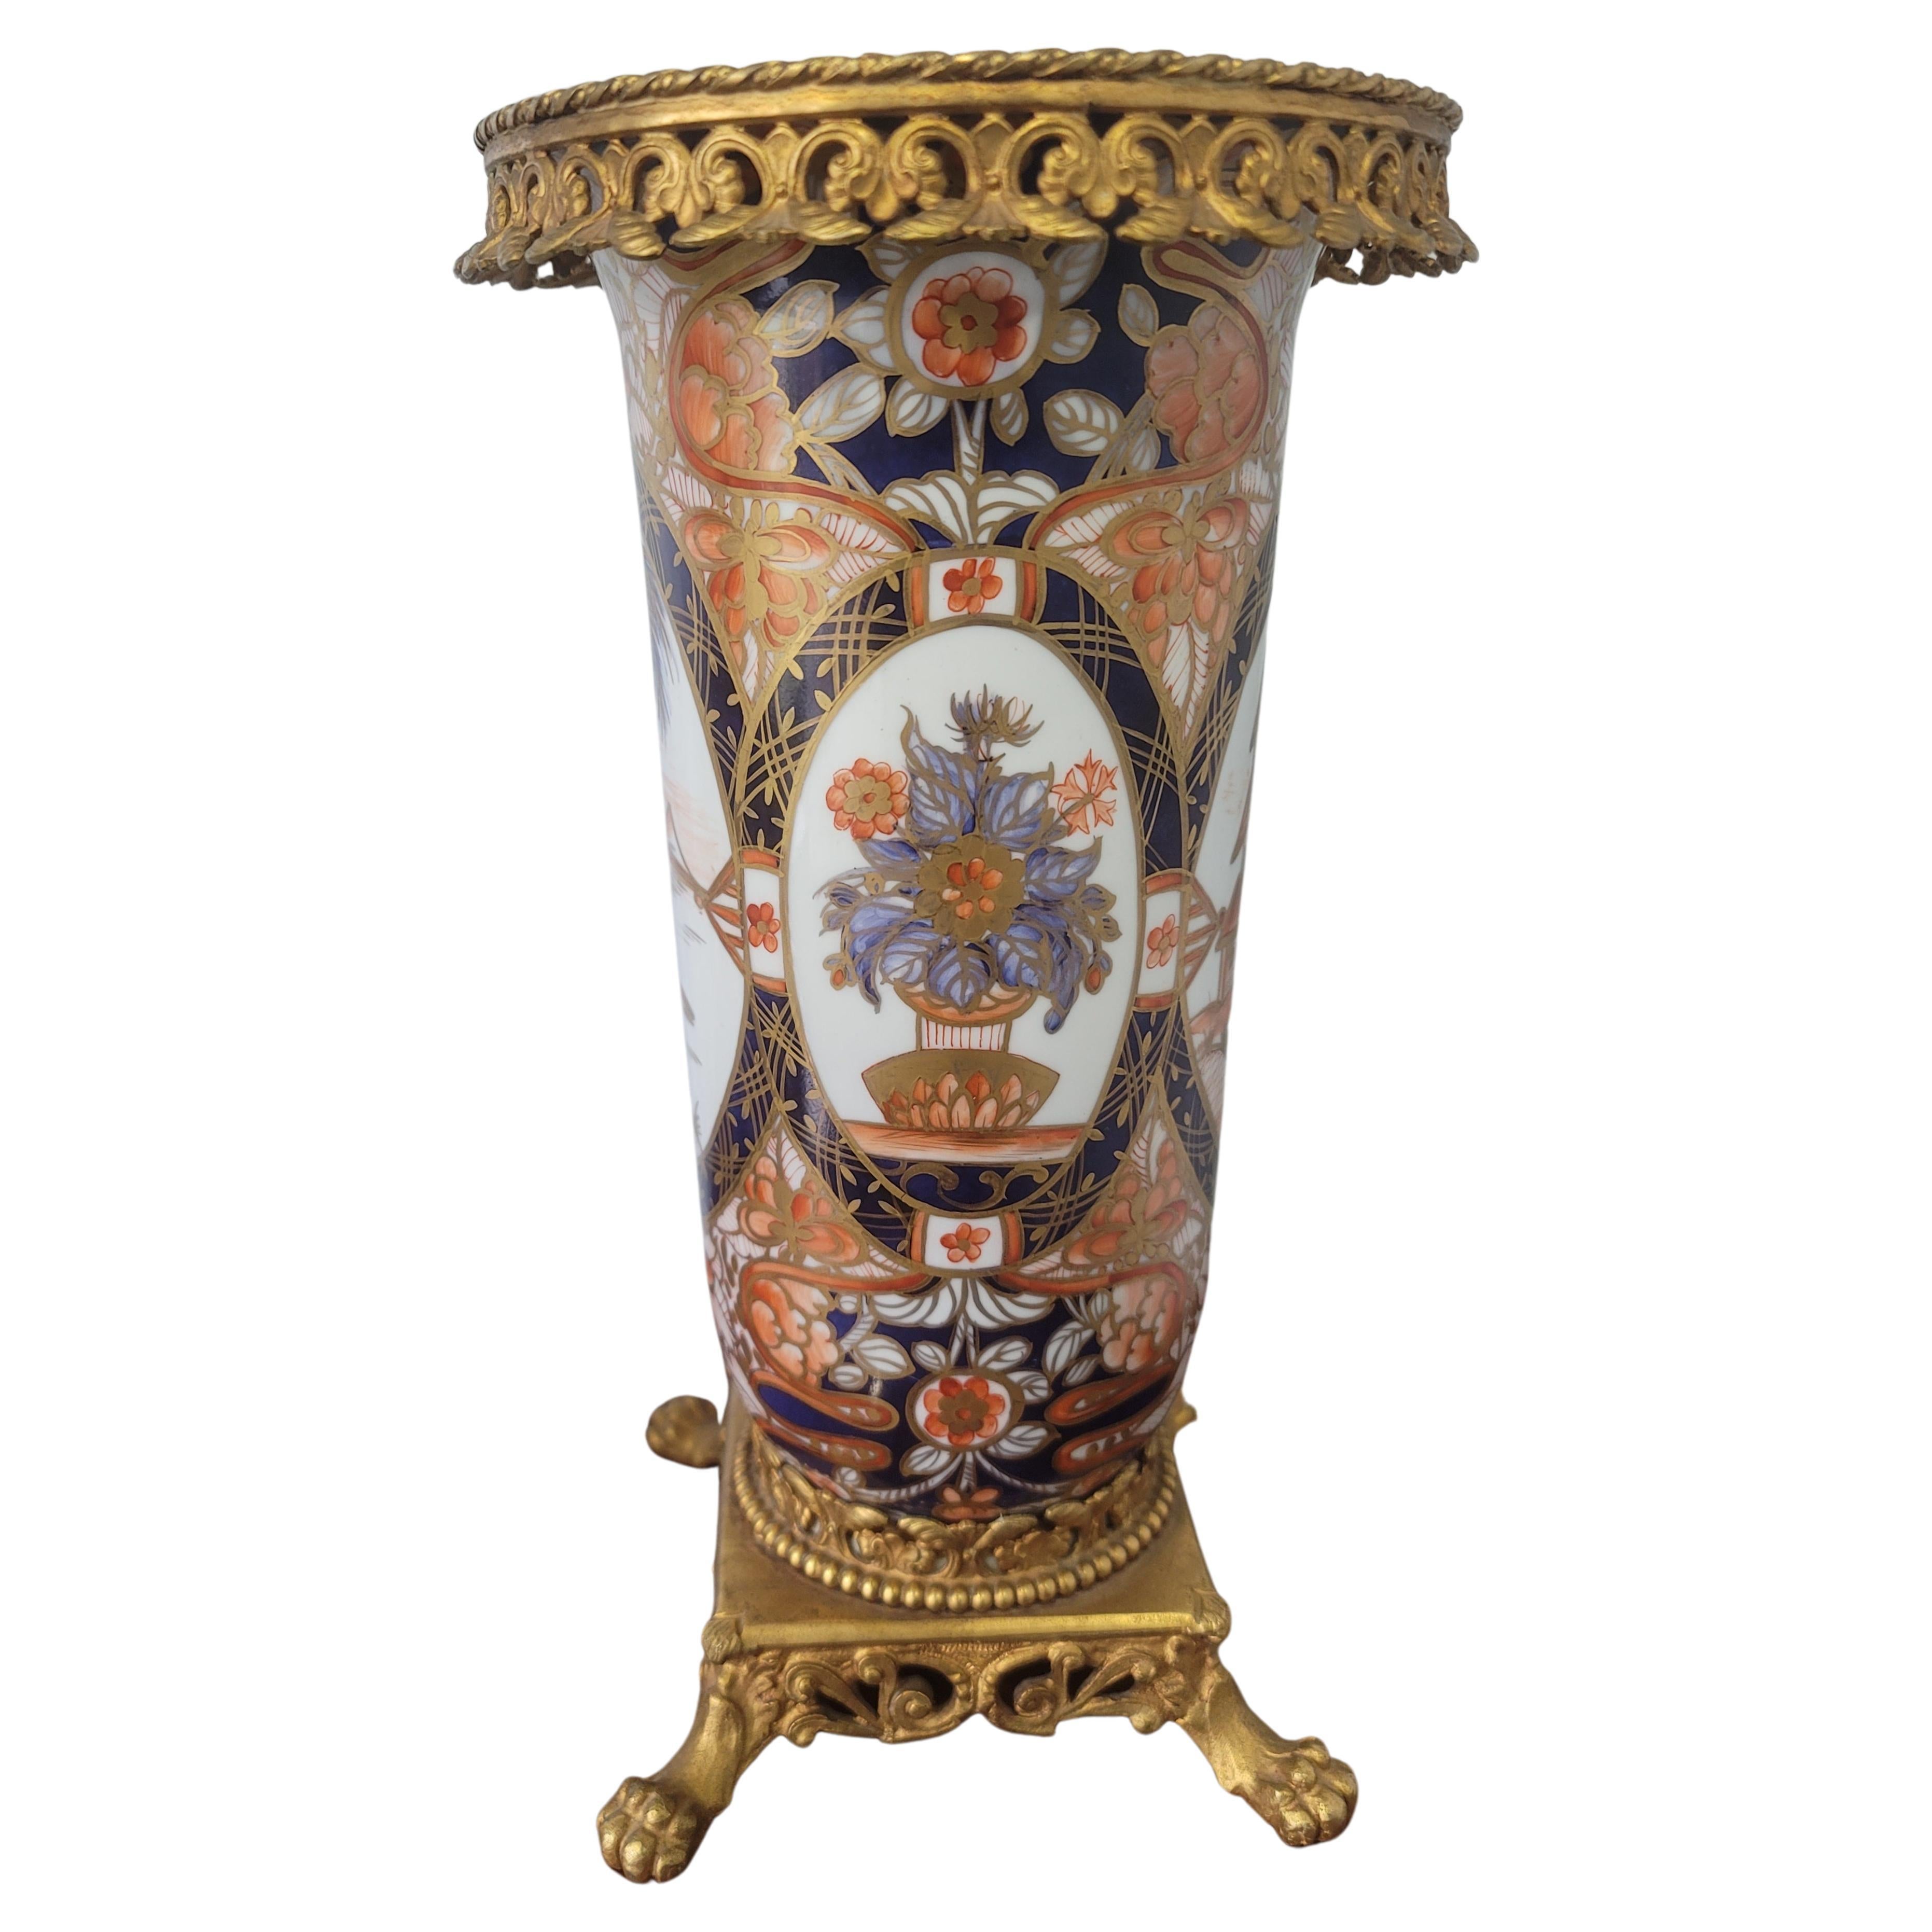 A rare, hand-painted  19th C. French Imari Porcelain Vase with Cast Brass Gallery and Base on Pawfeet, with fluted body of baluster form rising to an open mouth. The top is decorated with a dense and abundant cast brass gallery. The body is